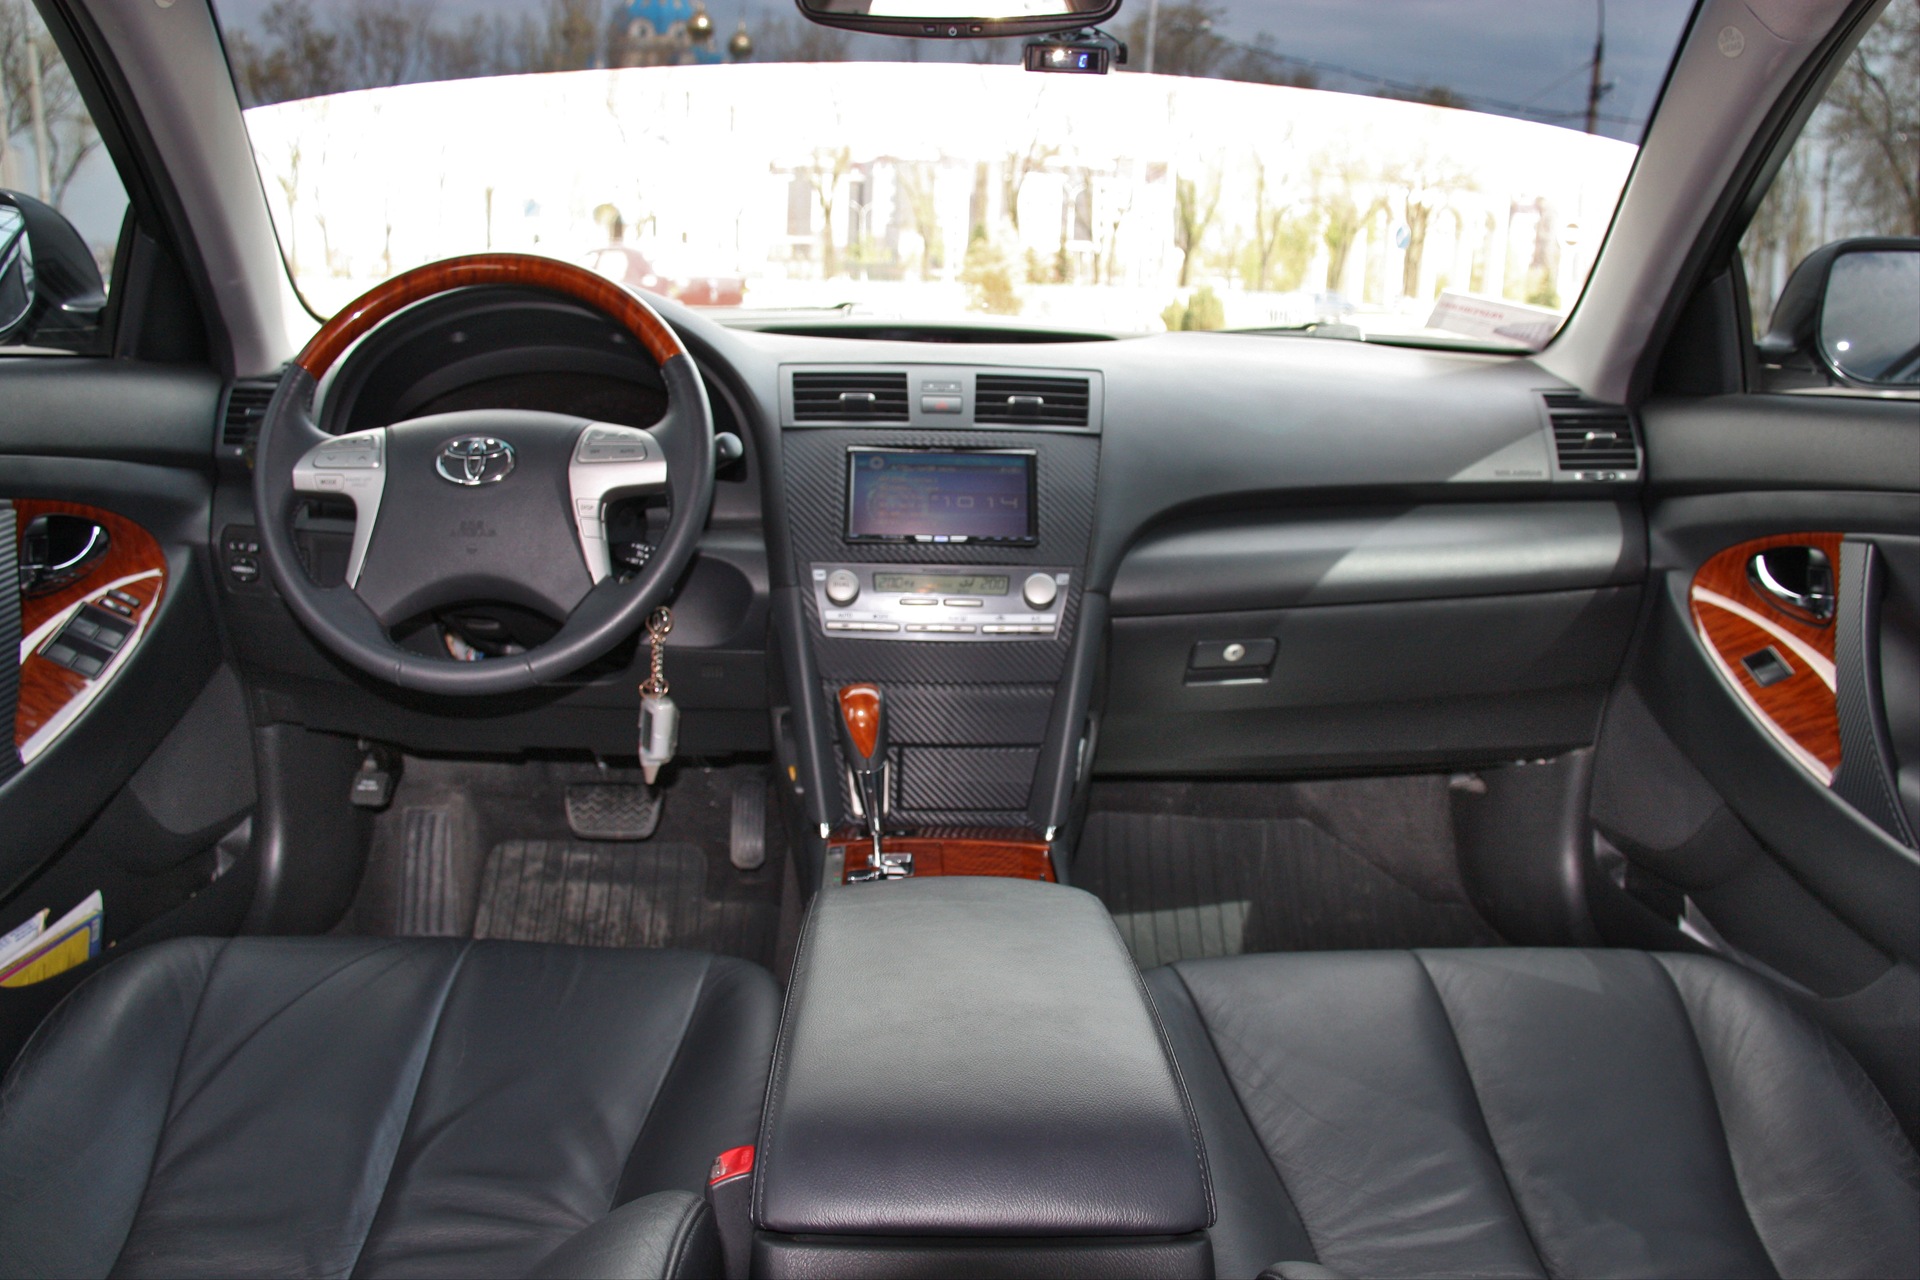 Photo of the interior or got rid of the turquoise insert on the center console - Toyota Camry 35 L 2008